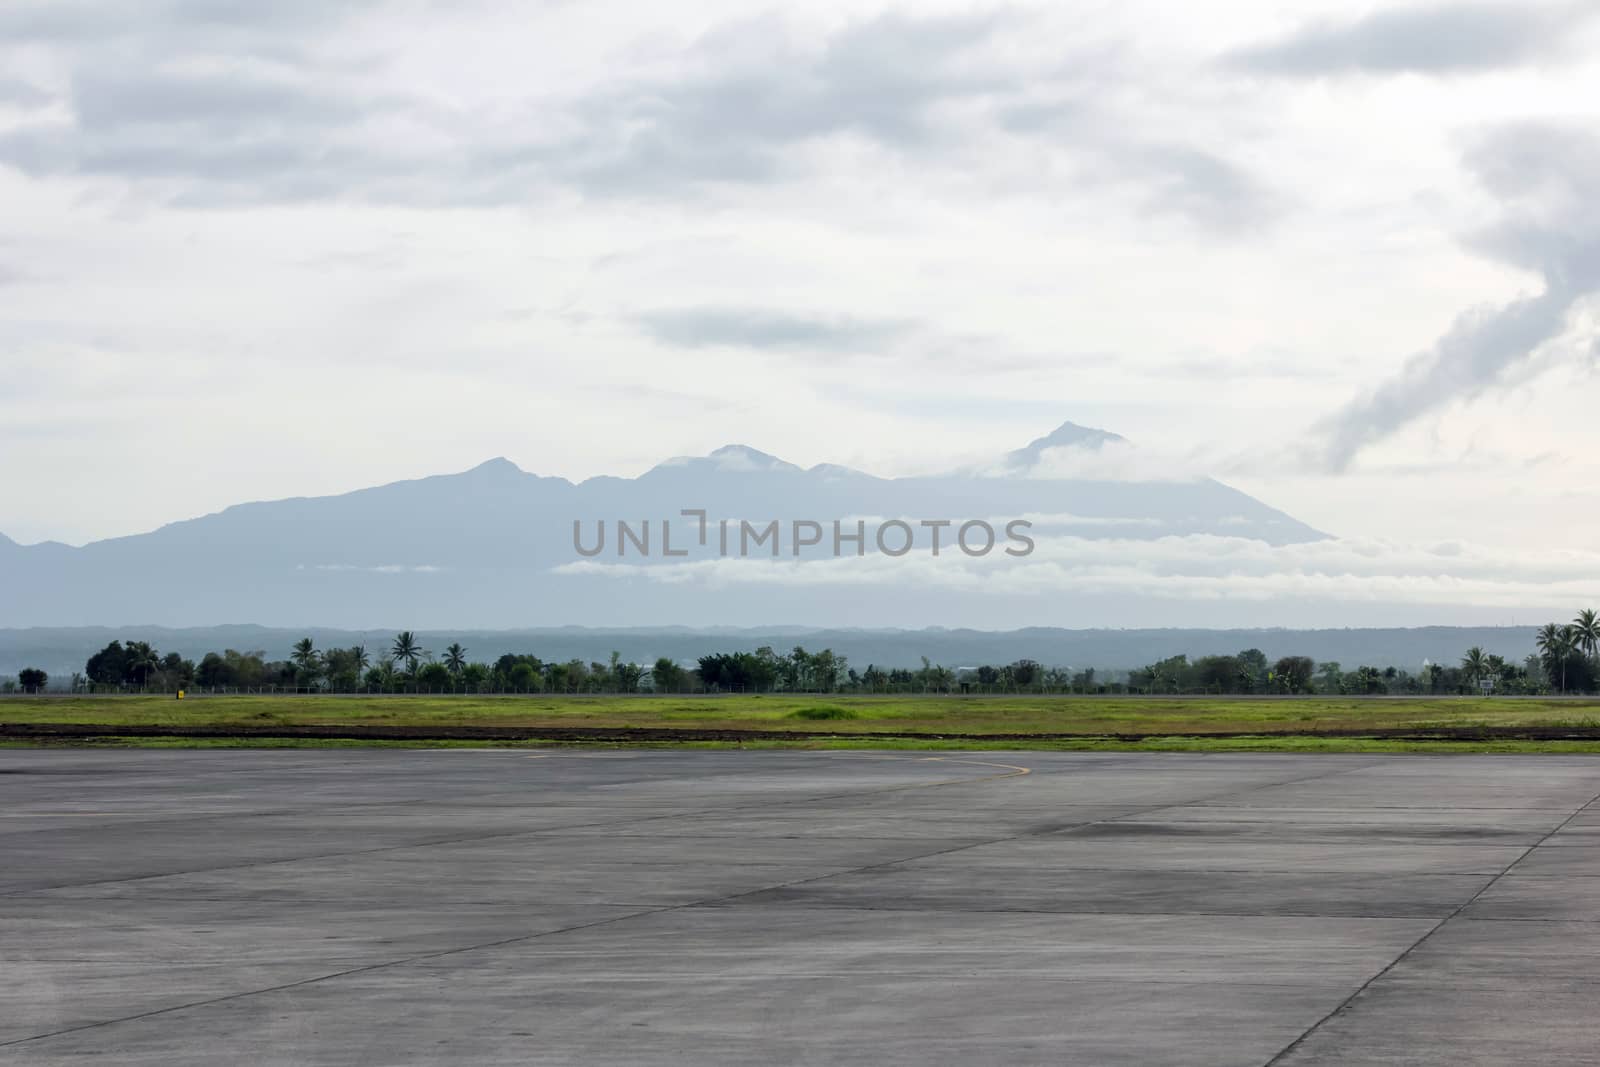 View runway with mountain and cloud background